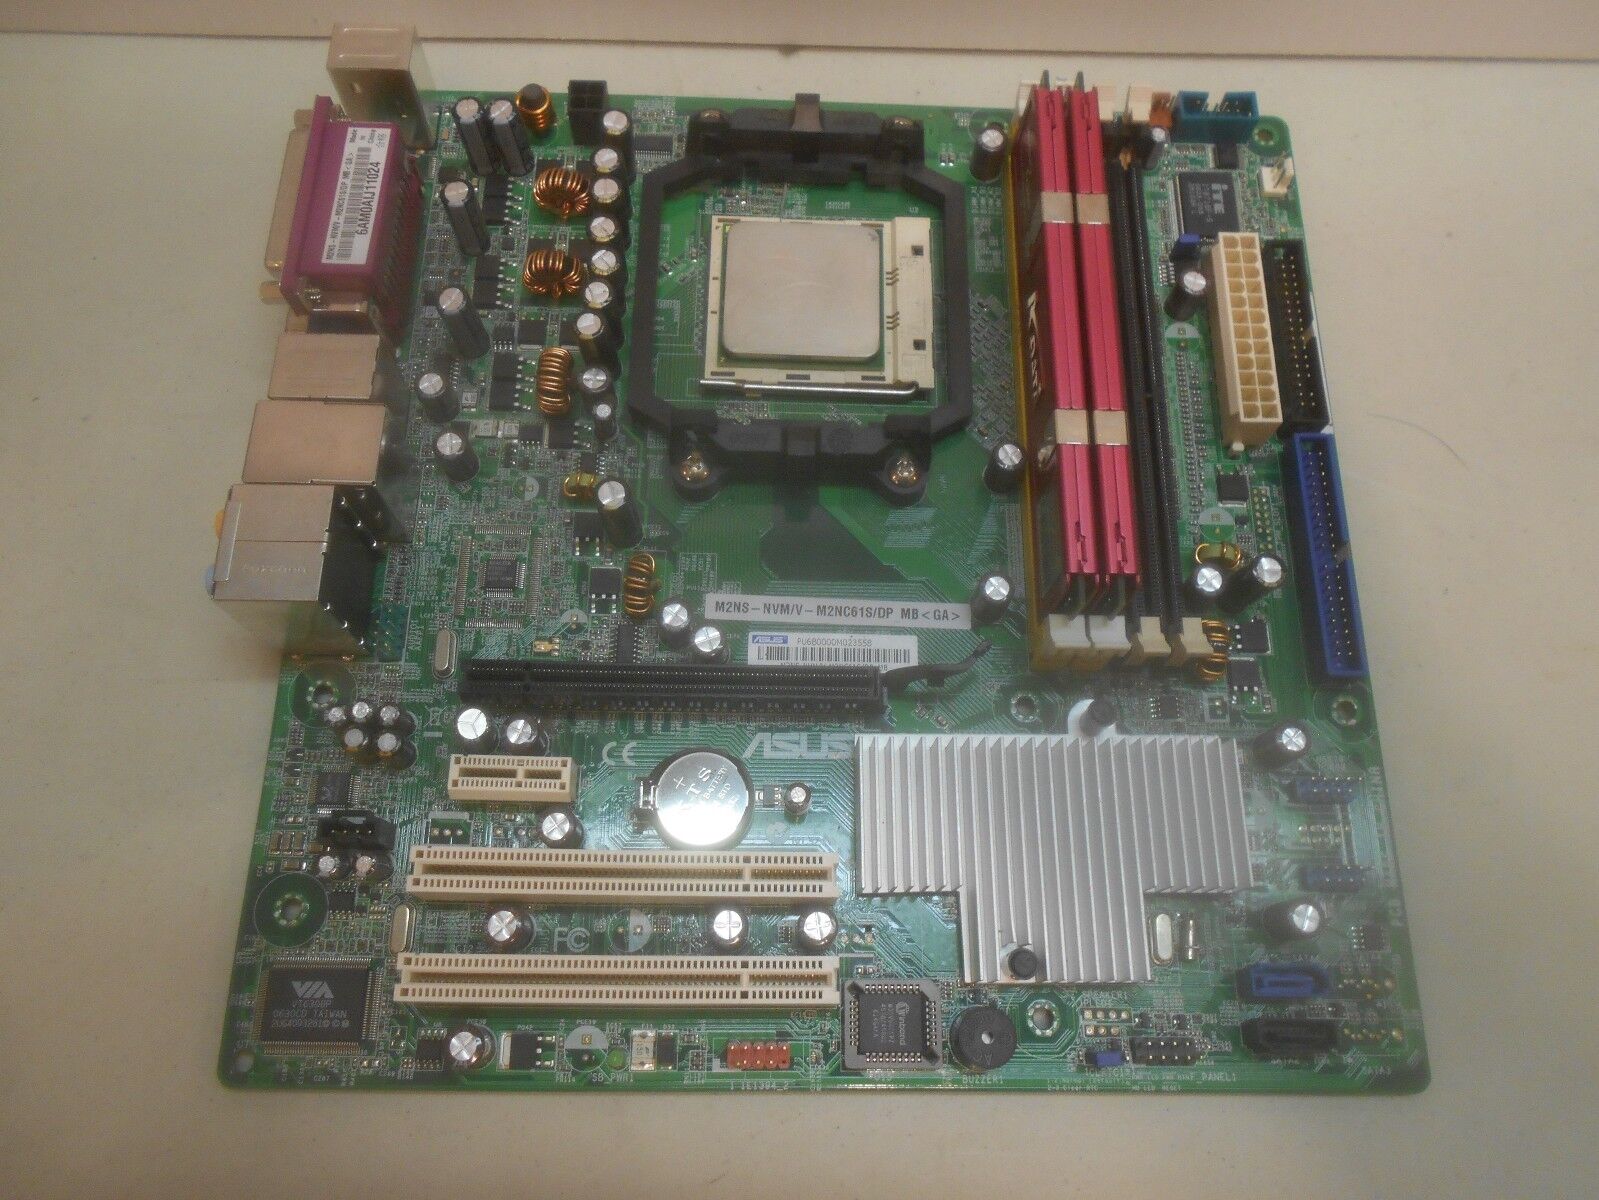 Asus M2NS-NVM/V Motherboard With Athlon 64 3800+ CPU and 2Gb Ram